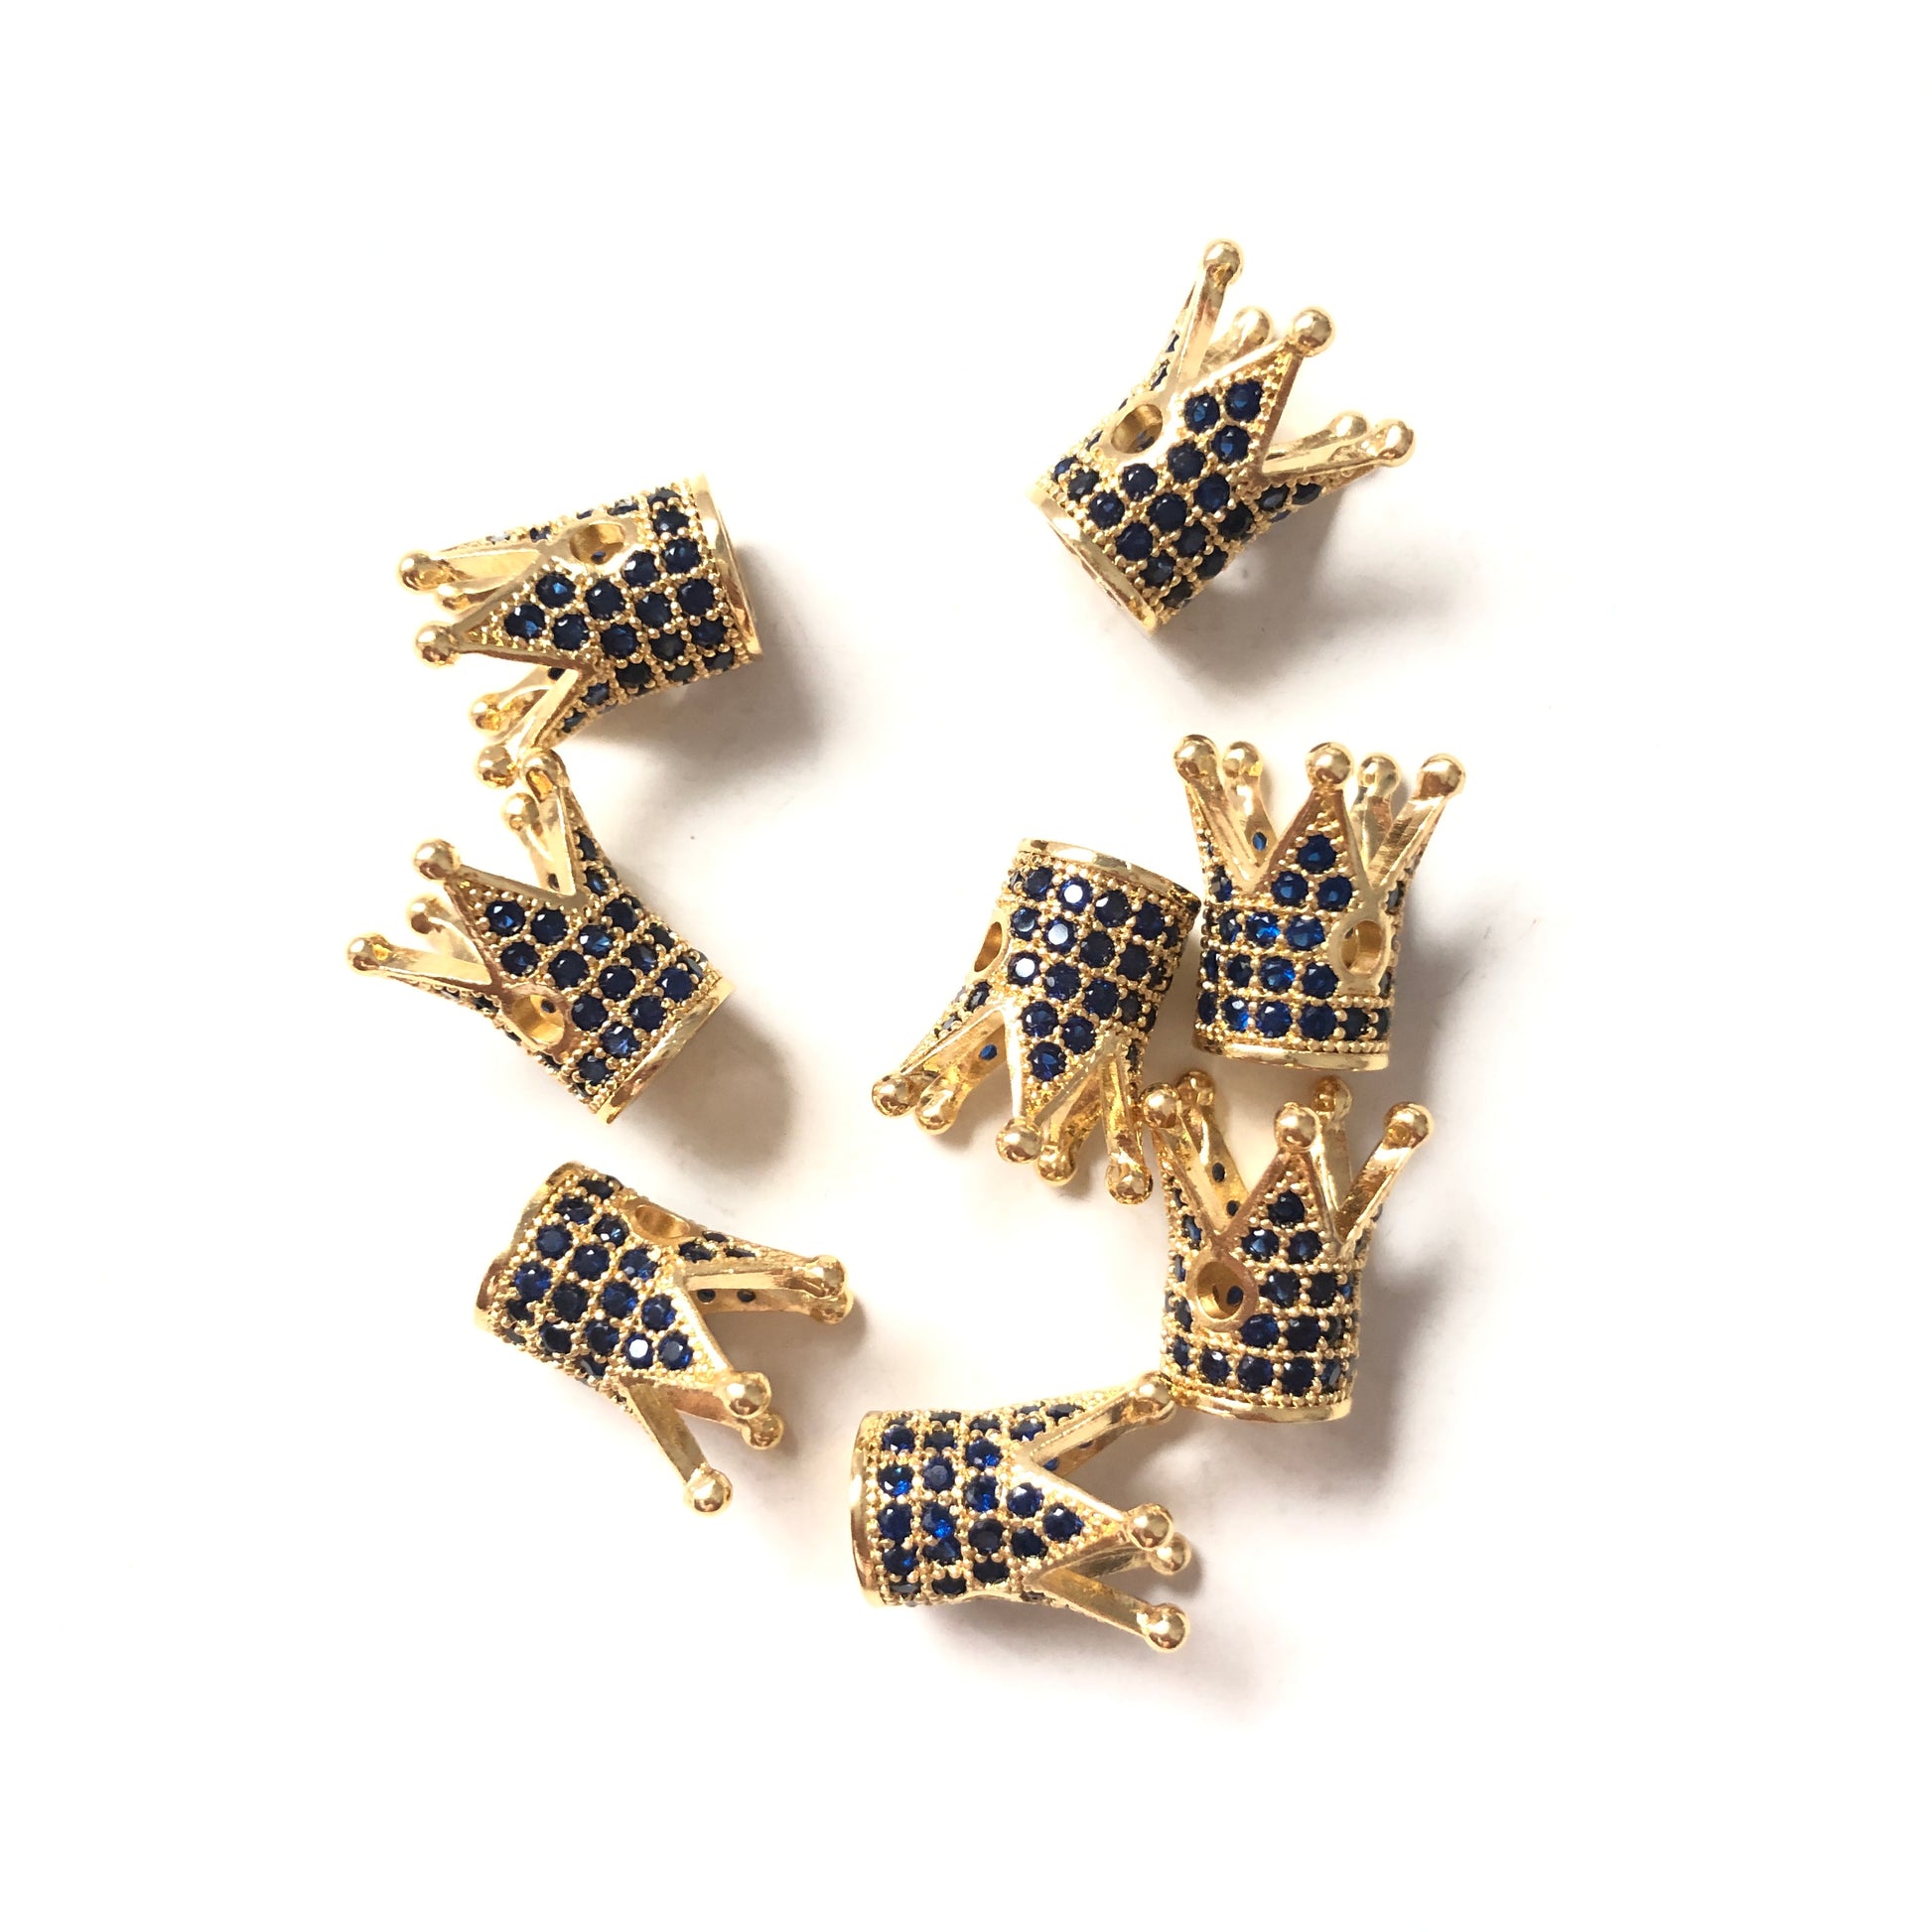 10pcs/lot Blue CZ Paved Crown Spacers Gold CZ Paved Spacers Colorful Zirconia Crown Beads Charms Beads Beyond